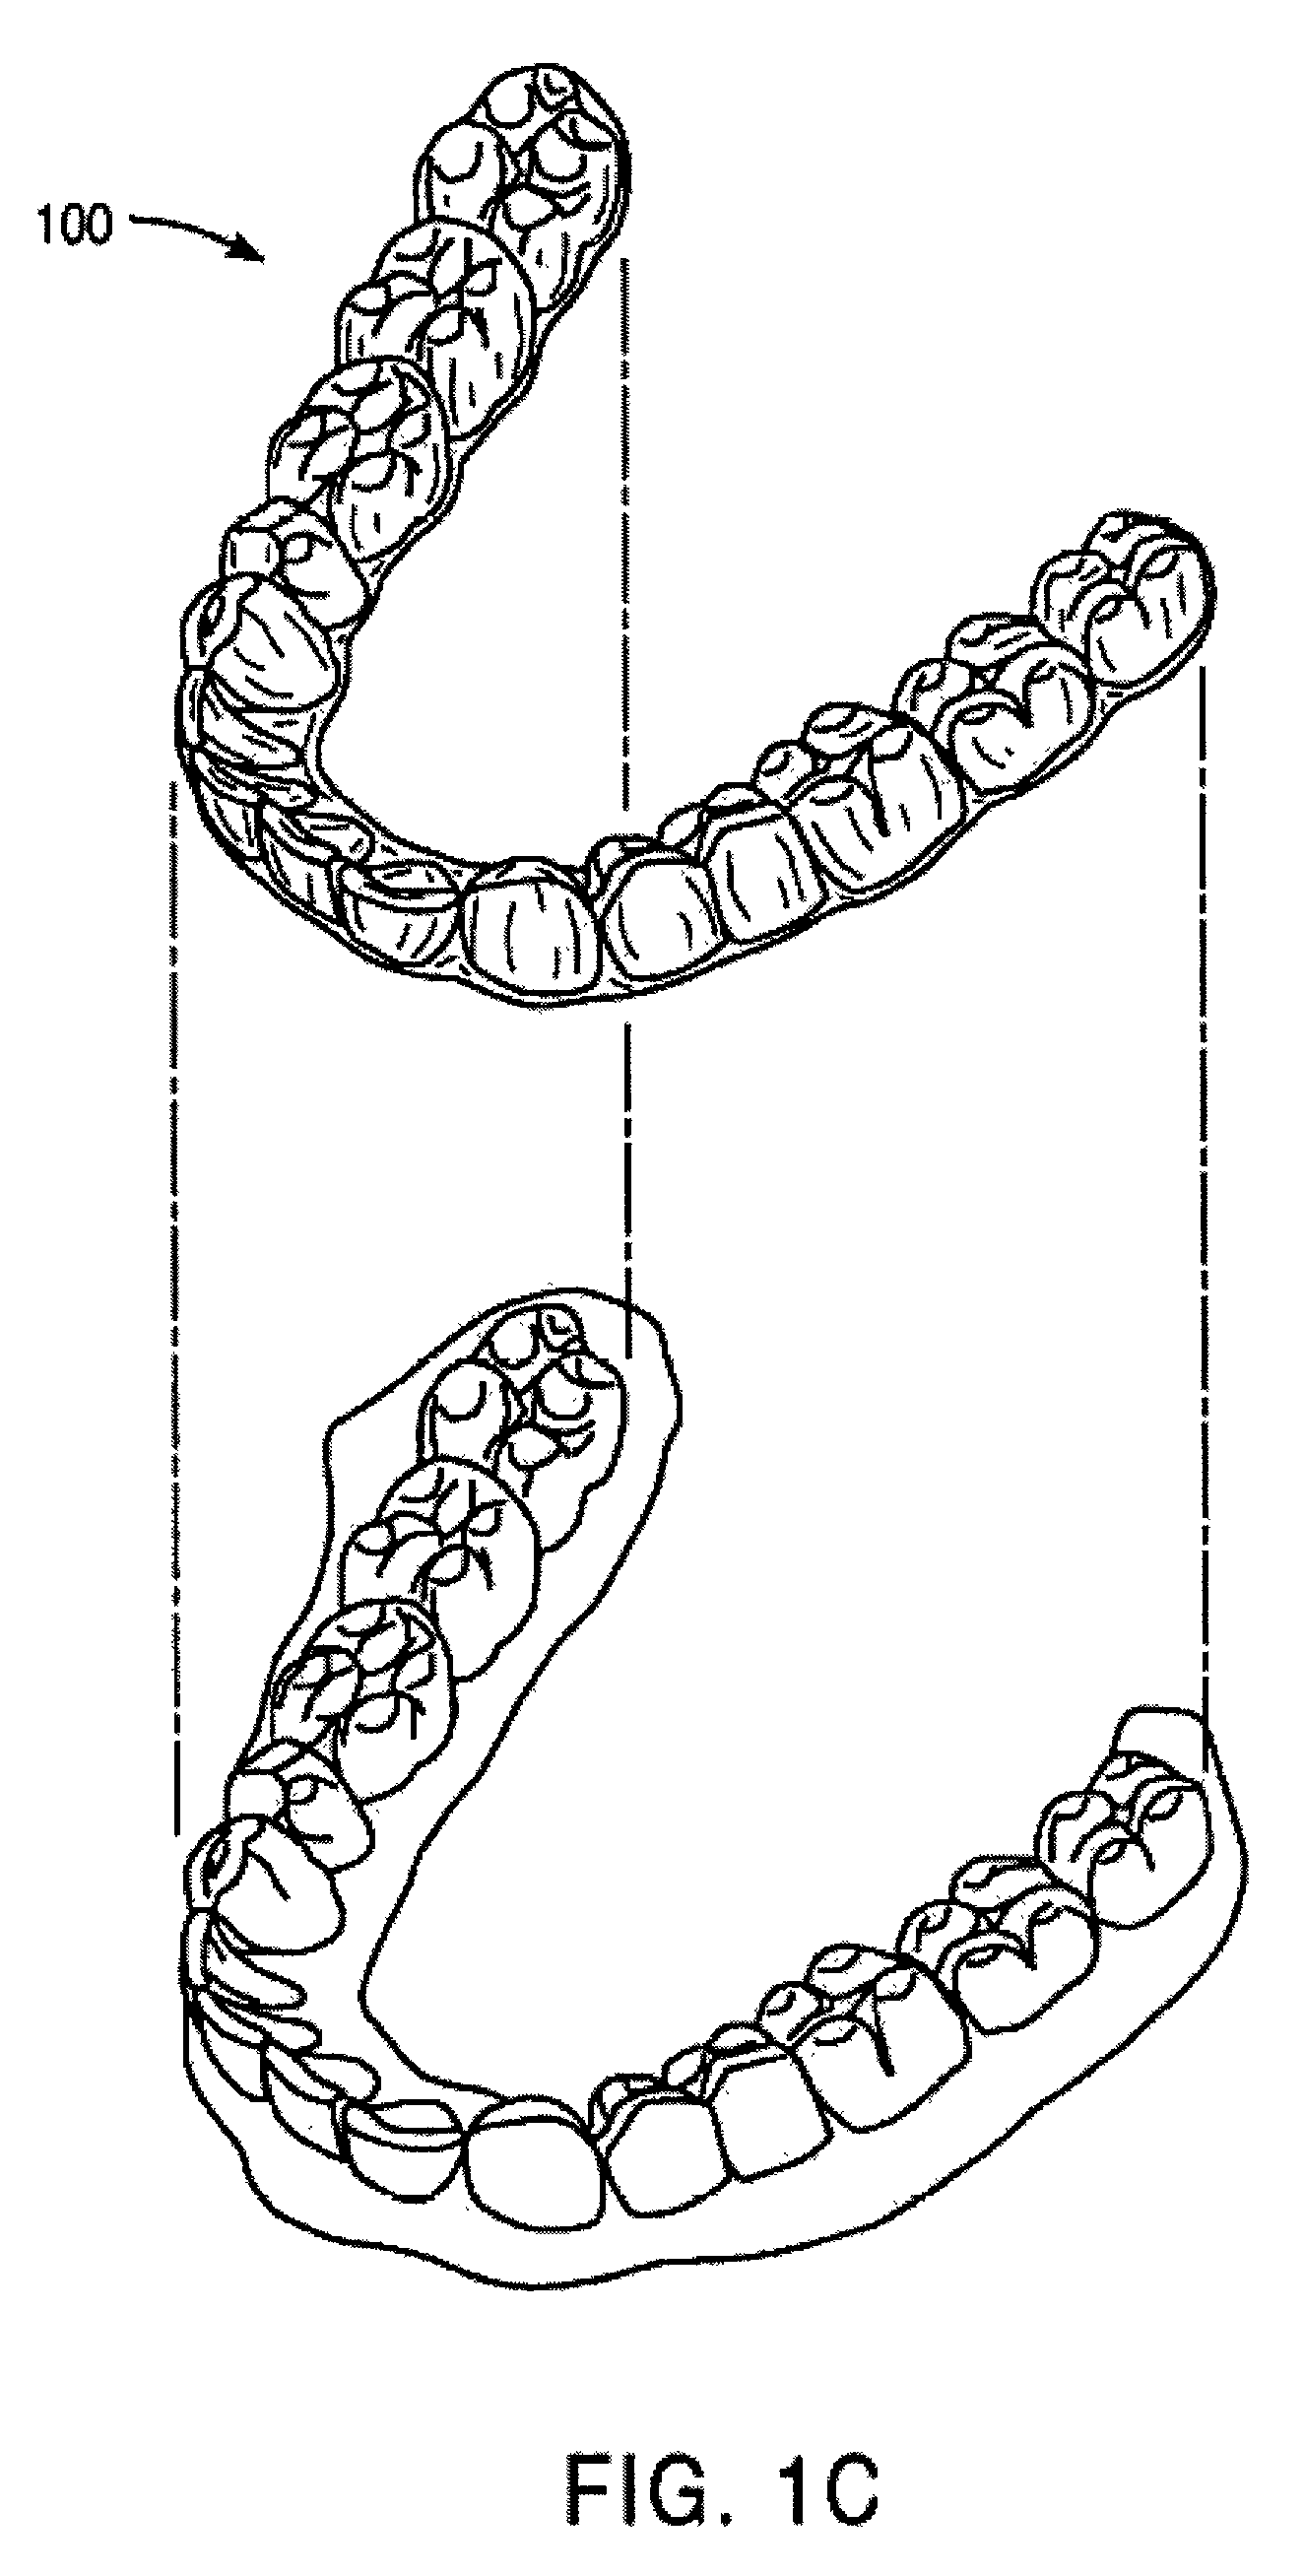 Methods and systems for treating teeth